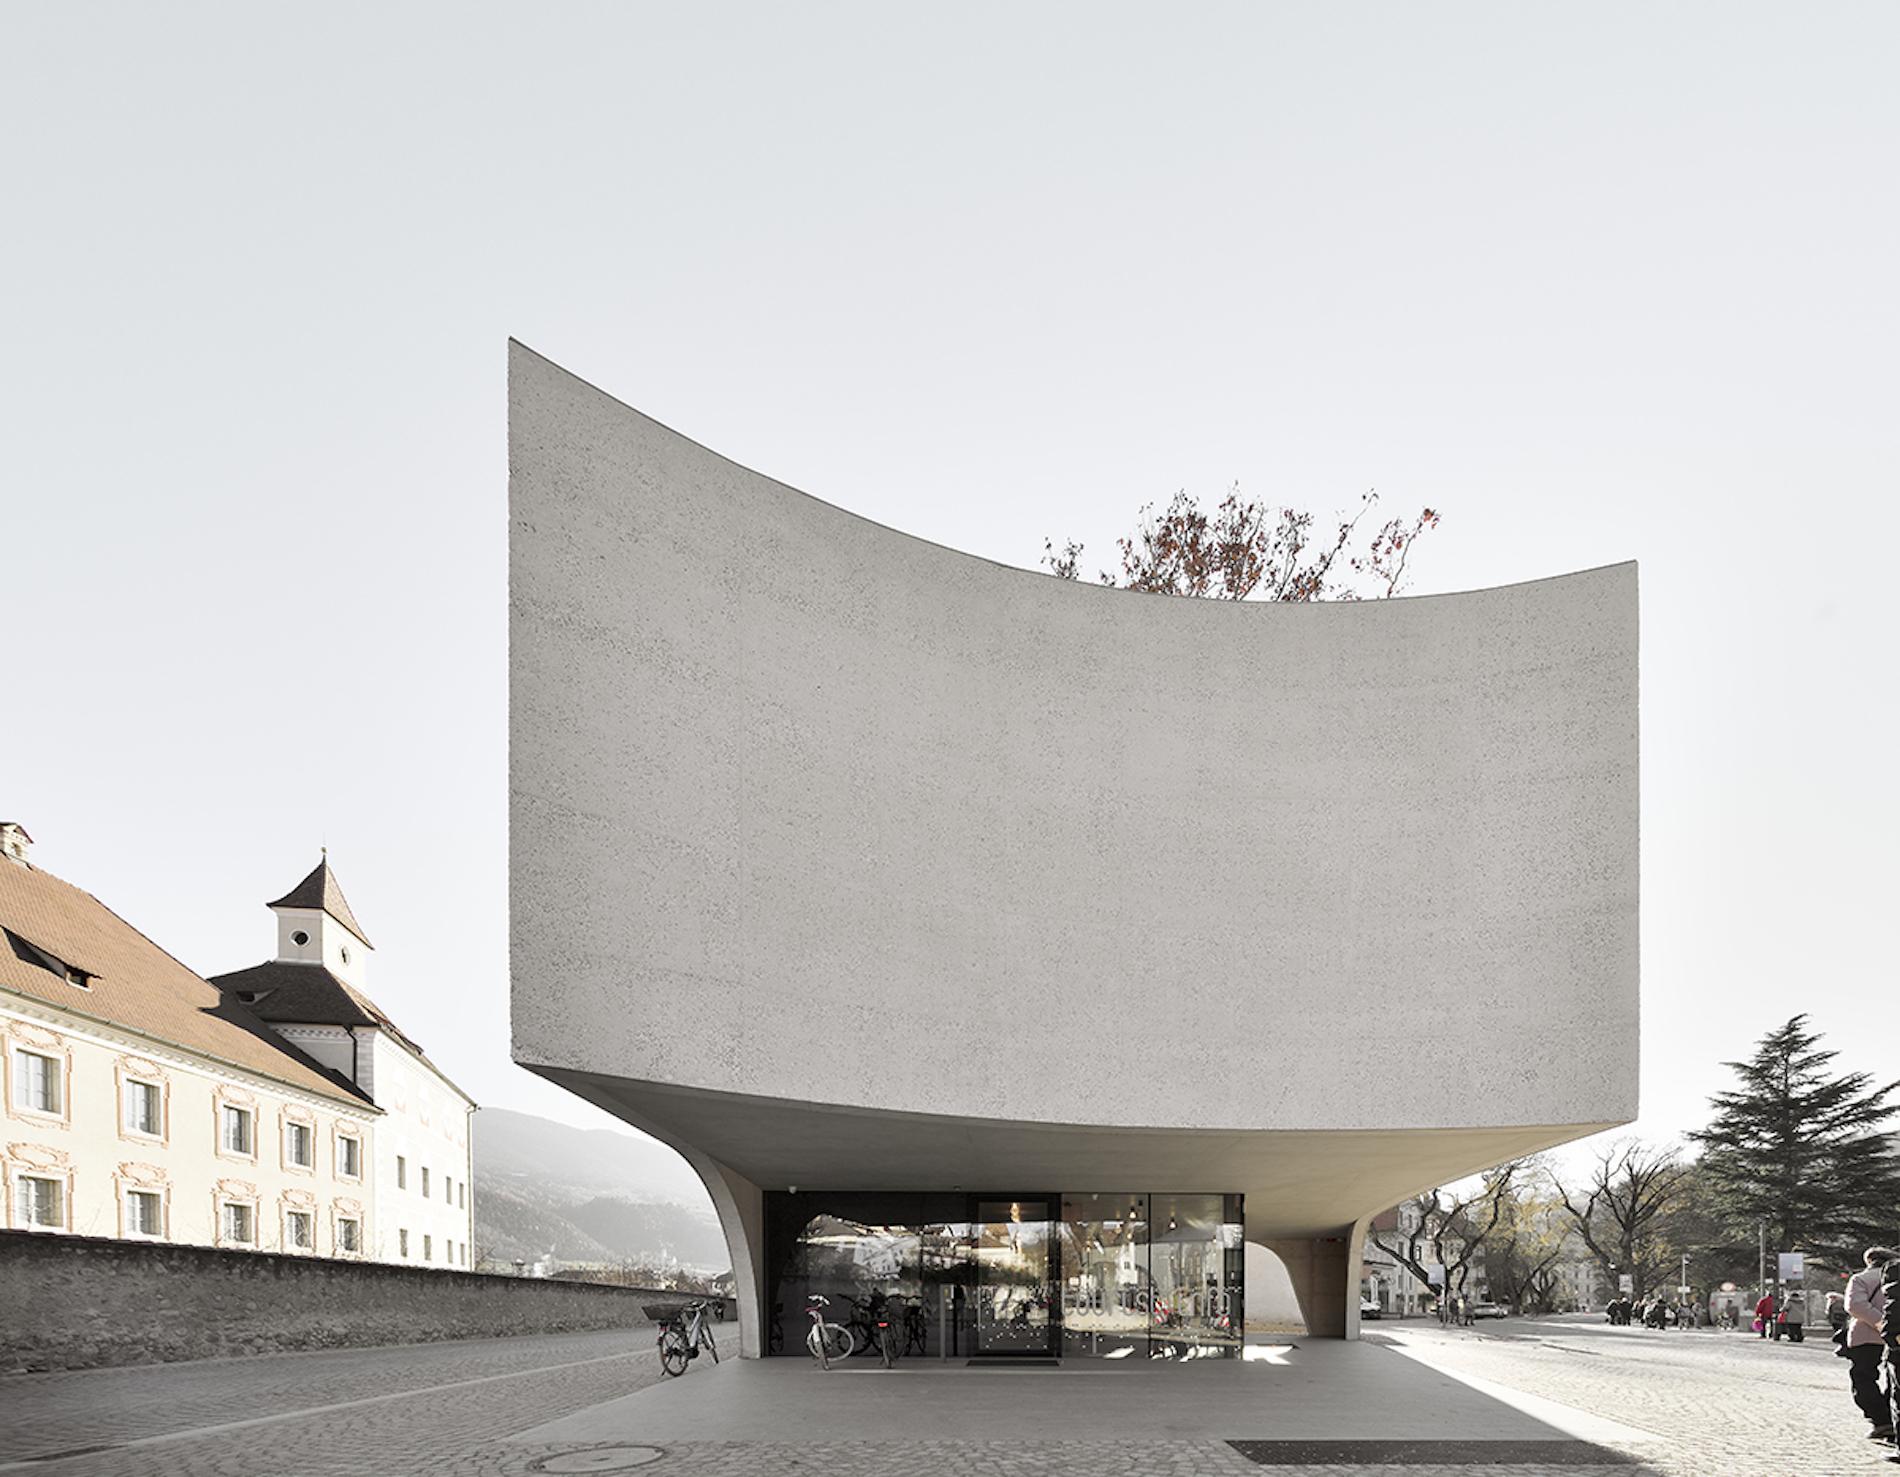 This Sinuous Tourist Office Is Inspired by the Tree it Enwraps